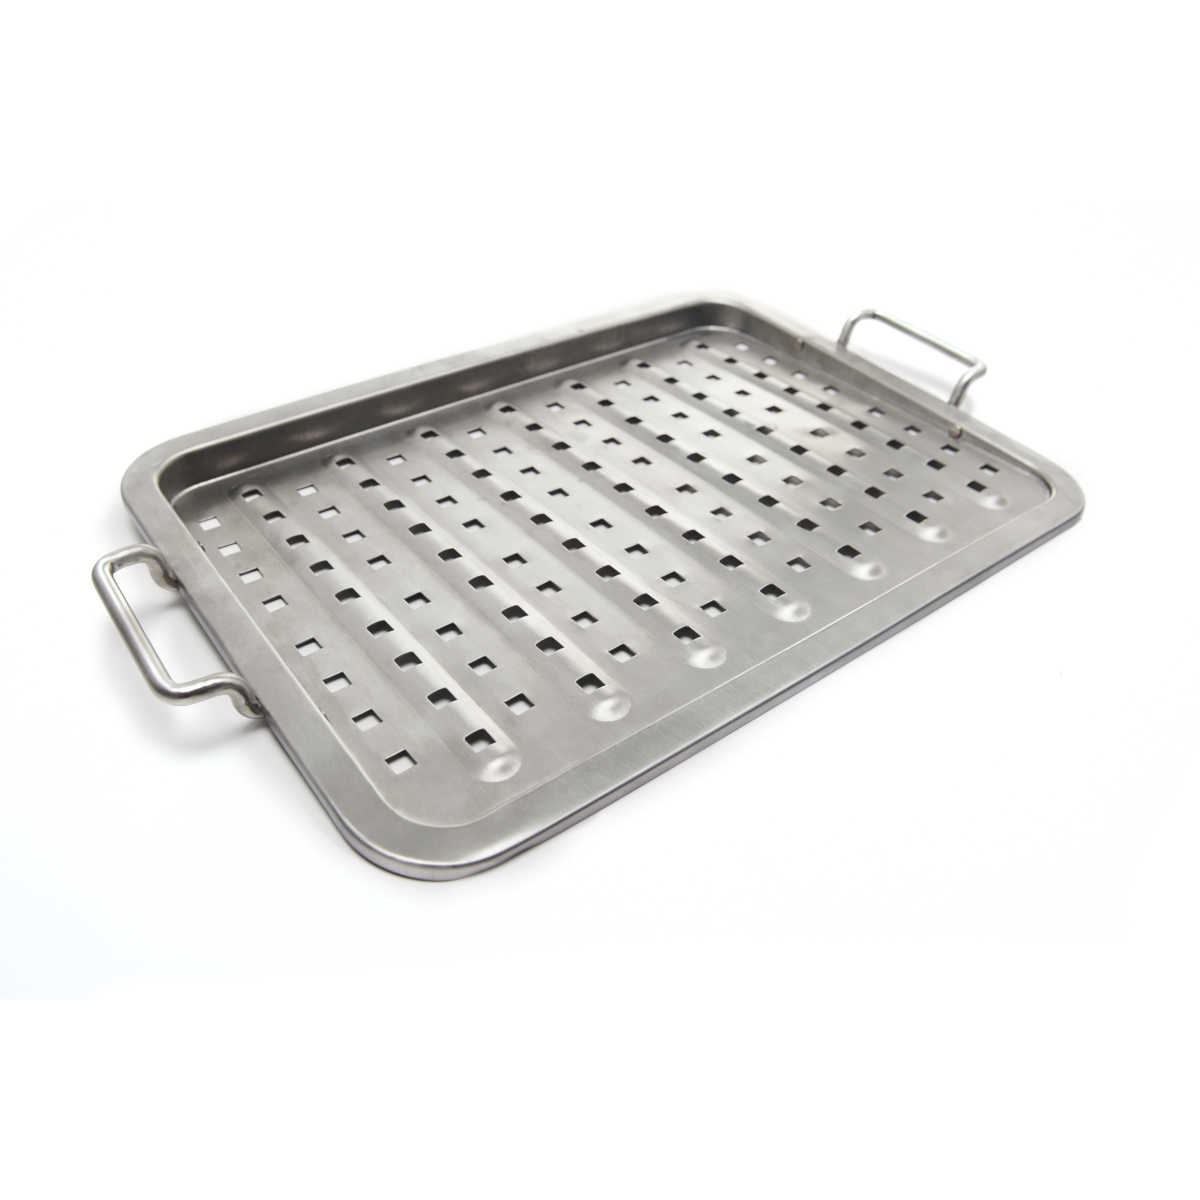 Broil King Grill Topper, 40 x 28 cm